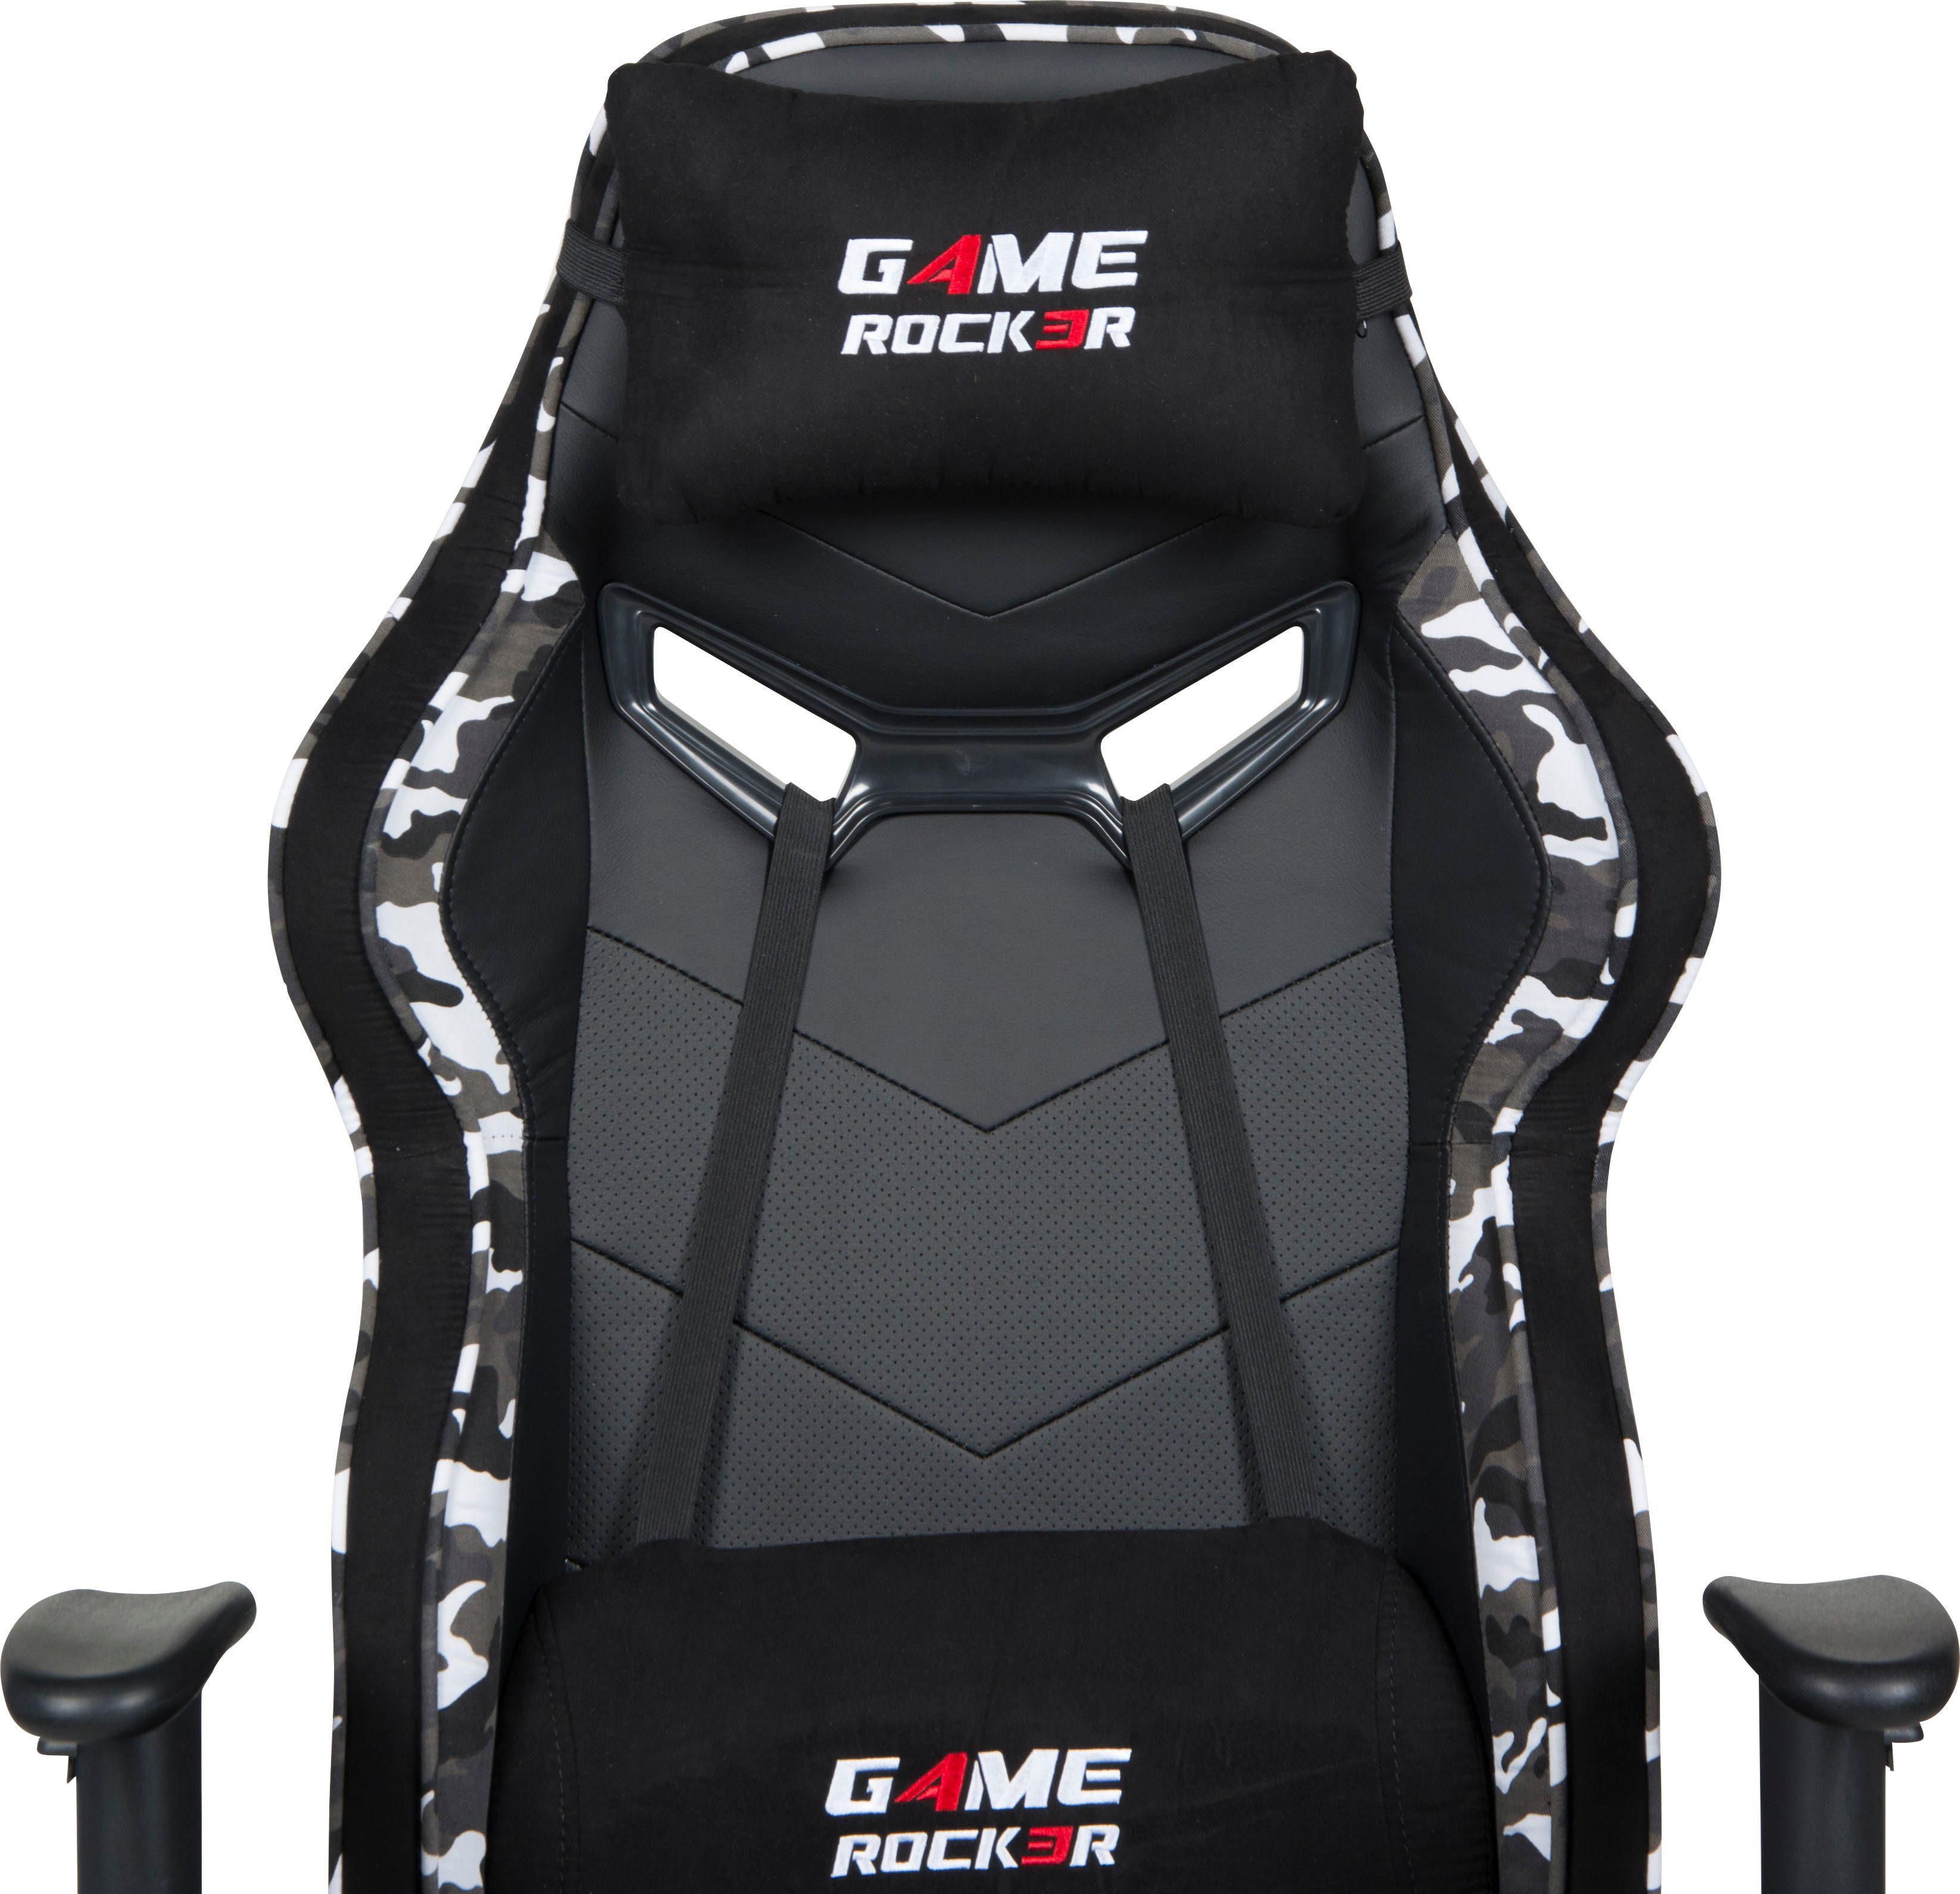 Duo Collection Chefsessel Game-Rocker Chair schwarz/camouflage G-30, Optik Camouflage Gaming in grau